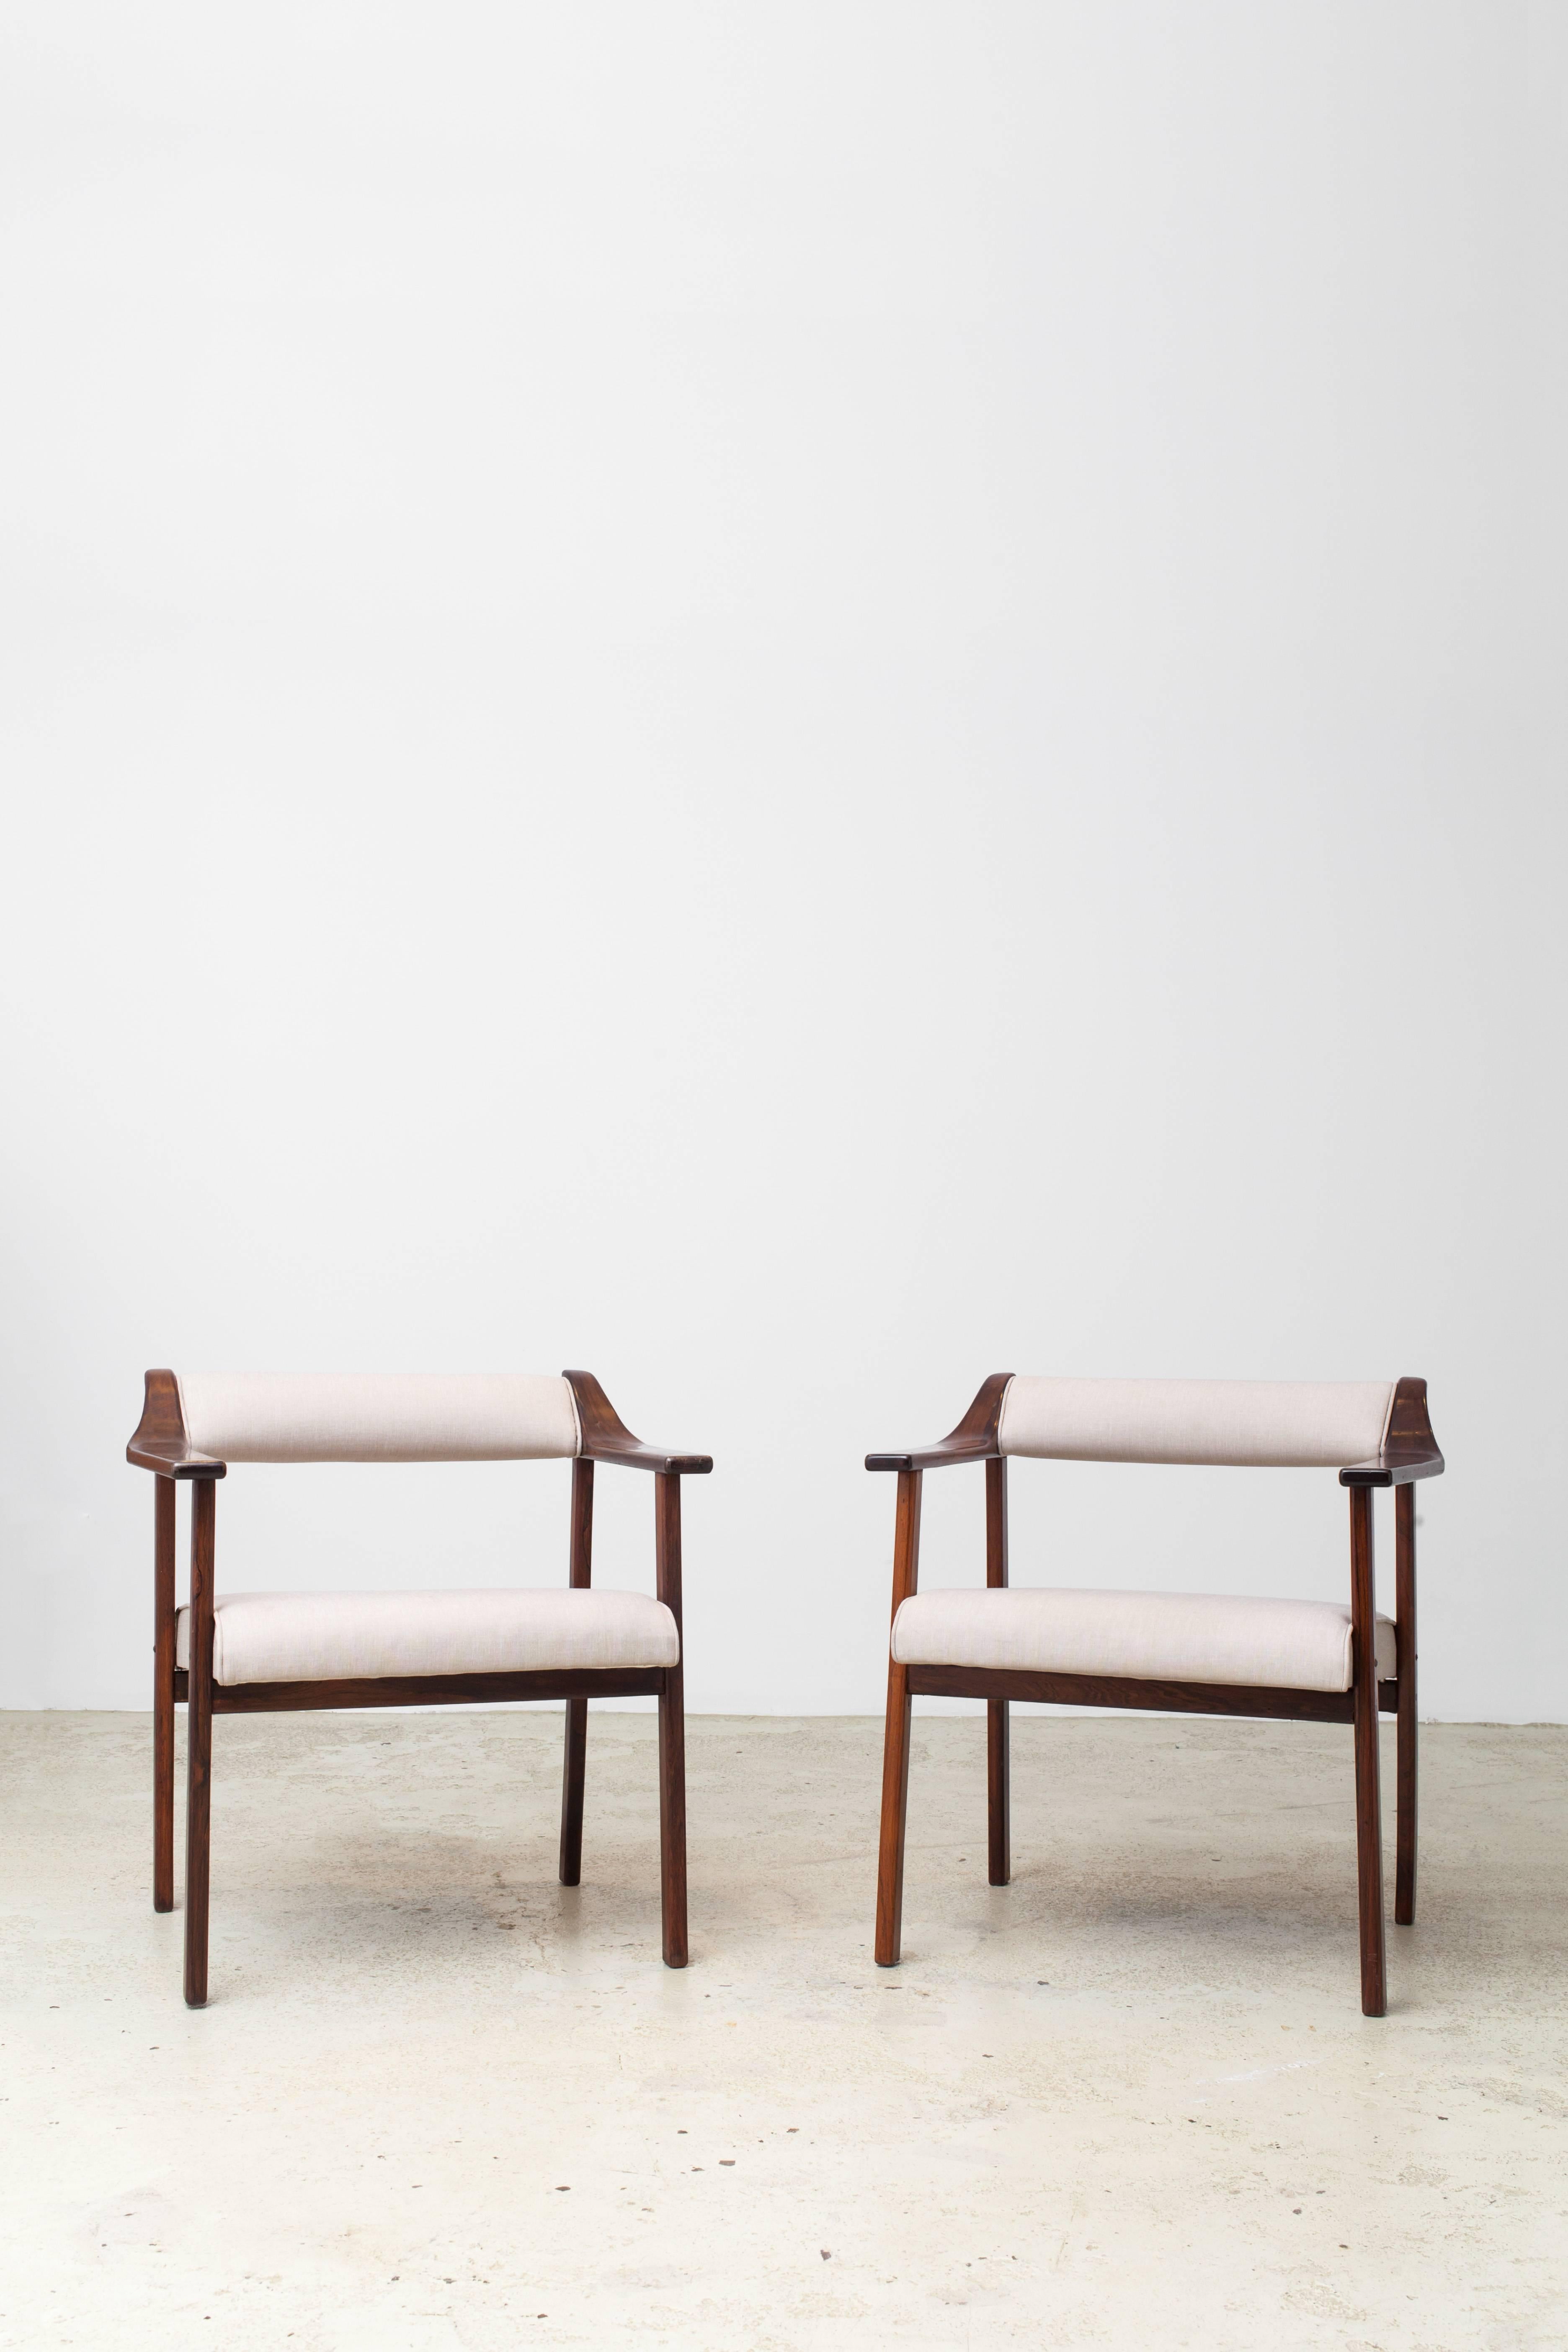 A pair of rare armchairs in solid jacaranda wood and fabric upholstery. Designed by Jean Gillon in 1968.